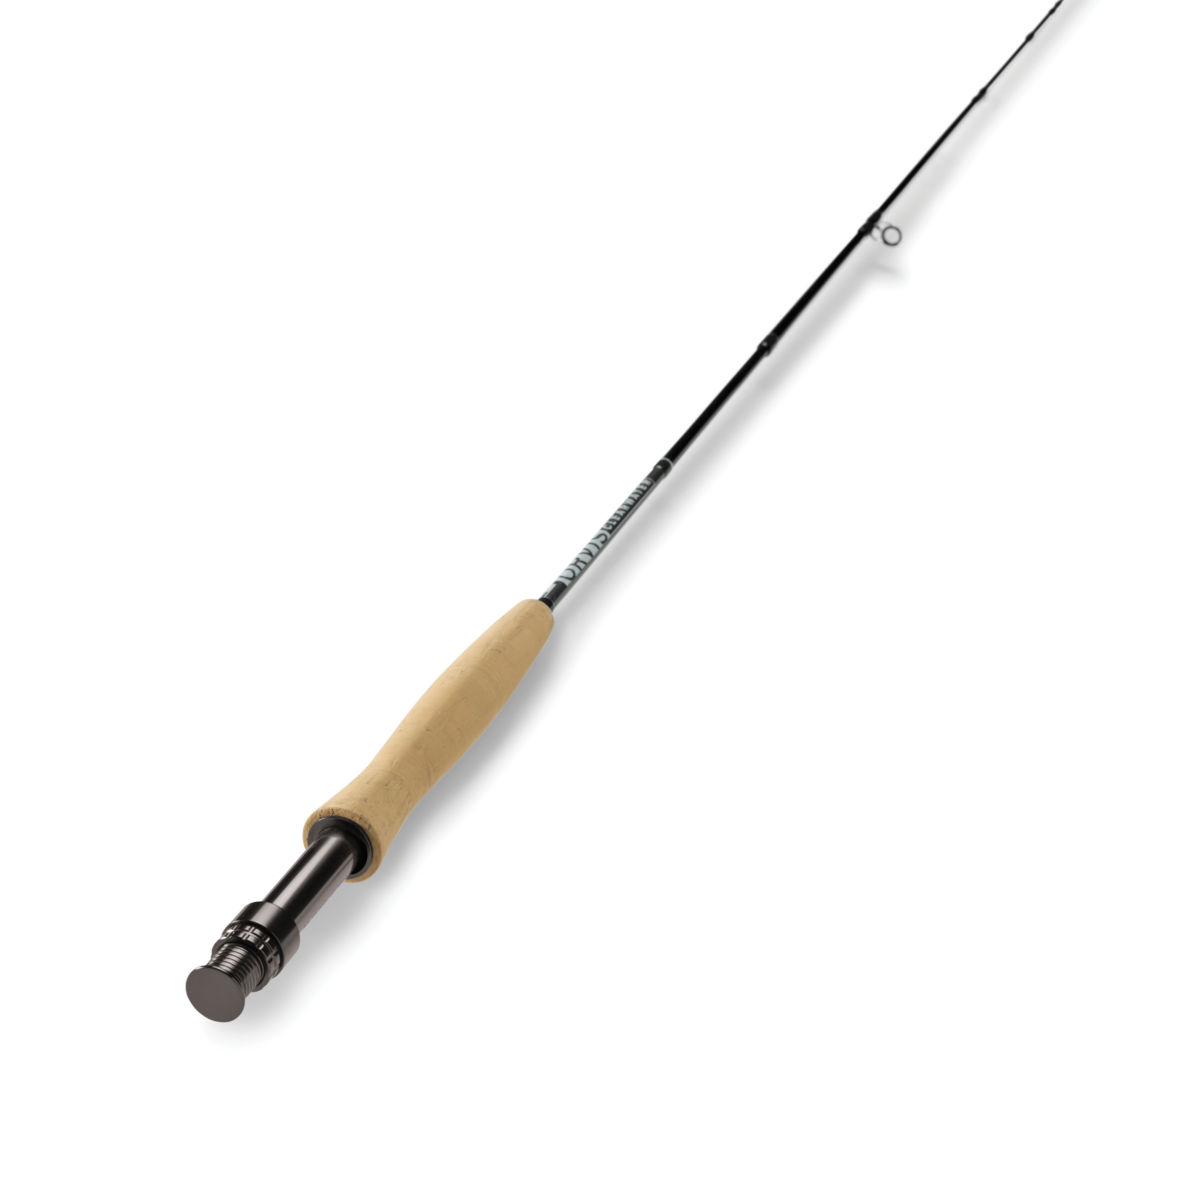 9'0" 6wt Orvis Clearwater 906-4 Fly Rod 